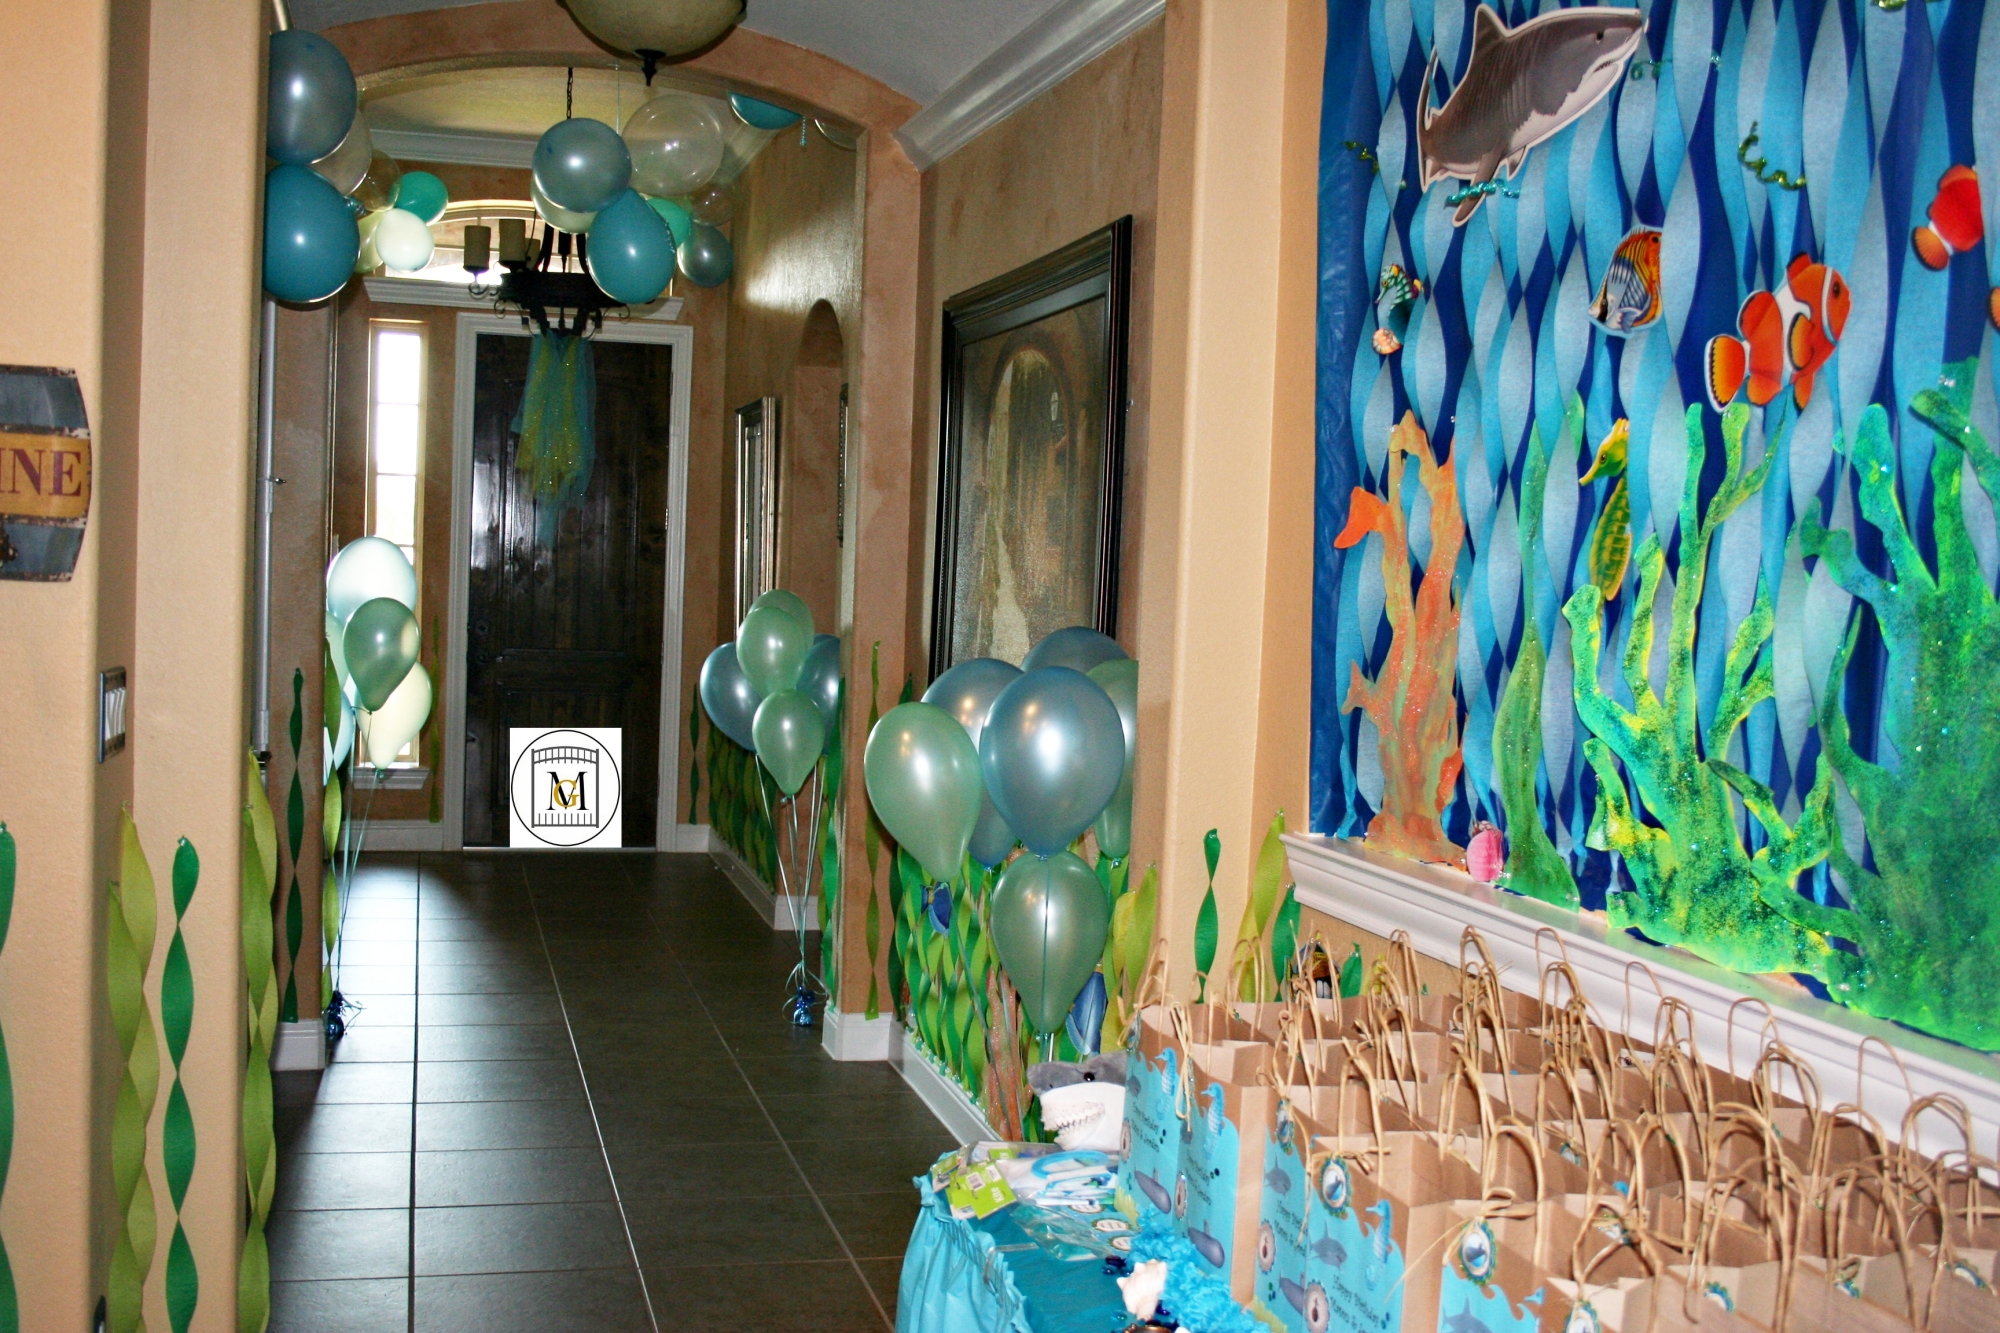 Under The Sea Party ideas